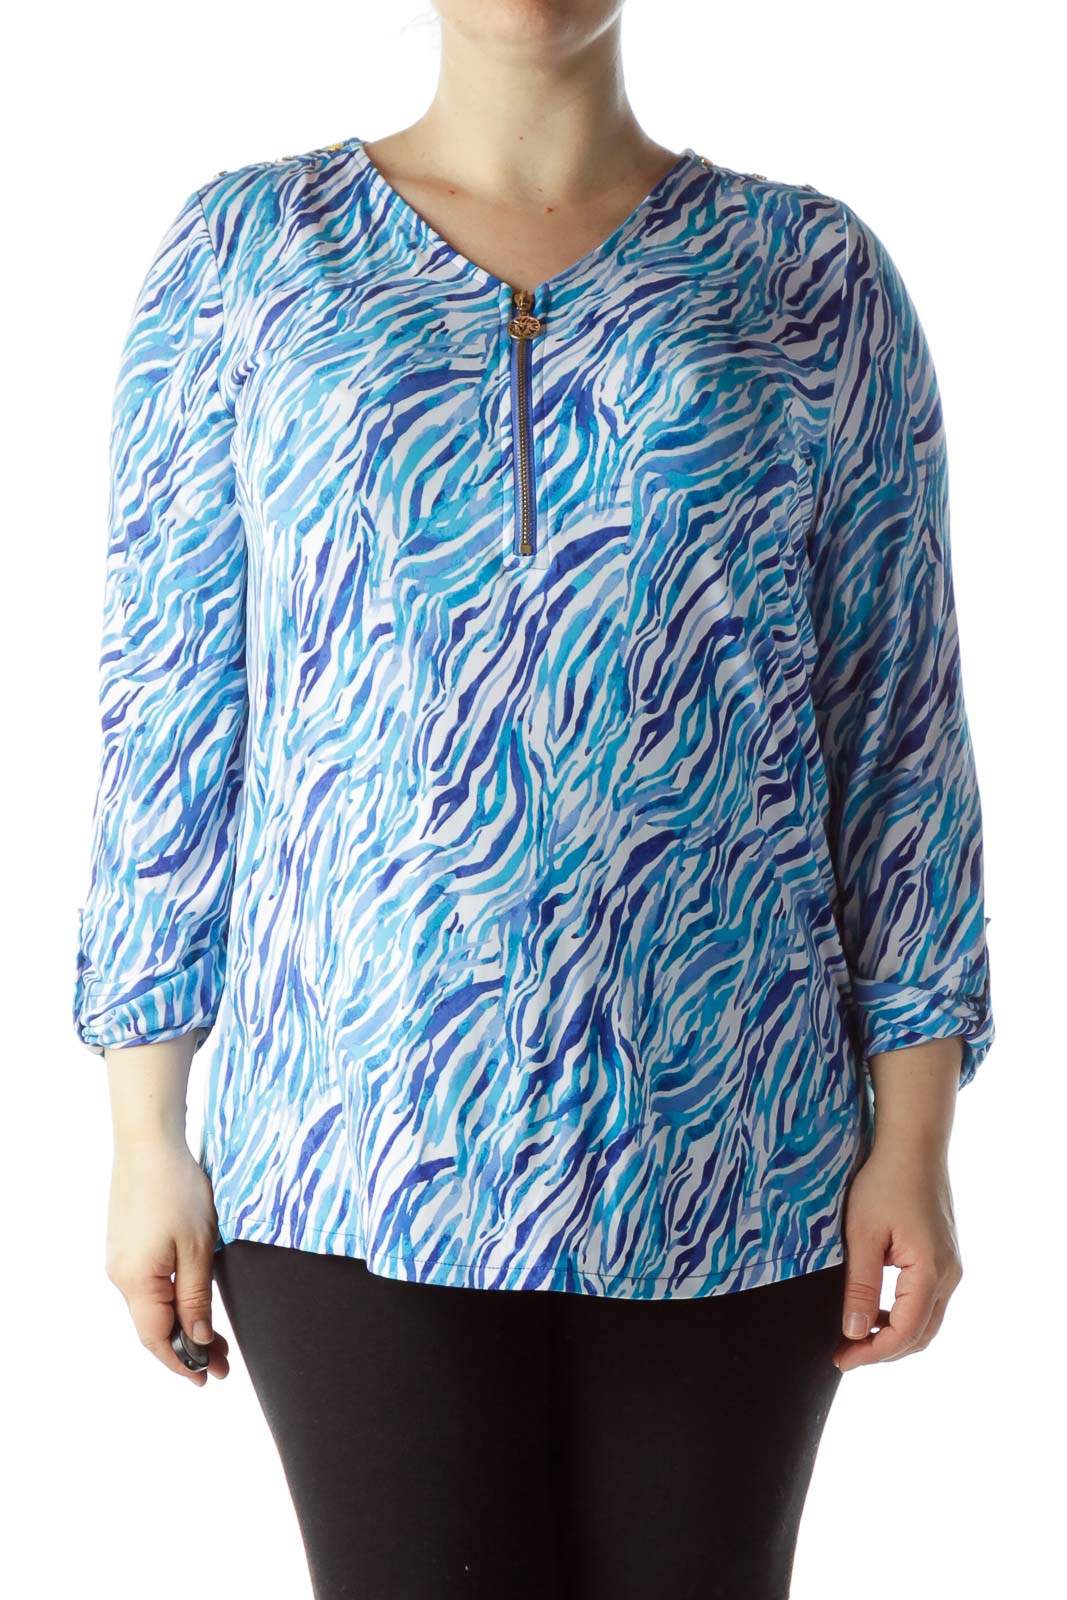 Blue White Print Gold Zippered Stretch Top Front